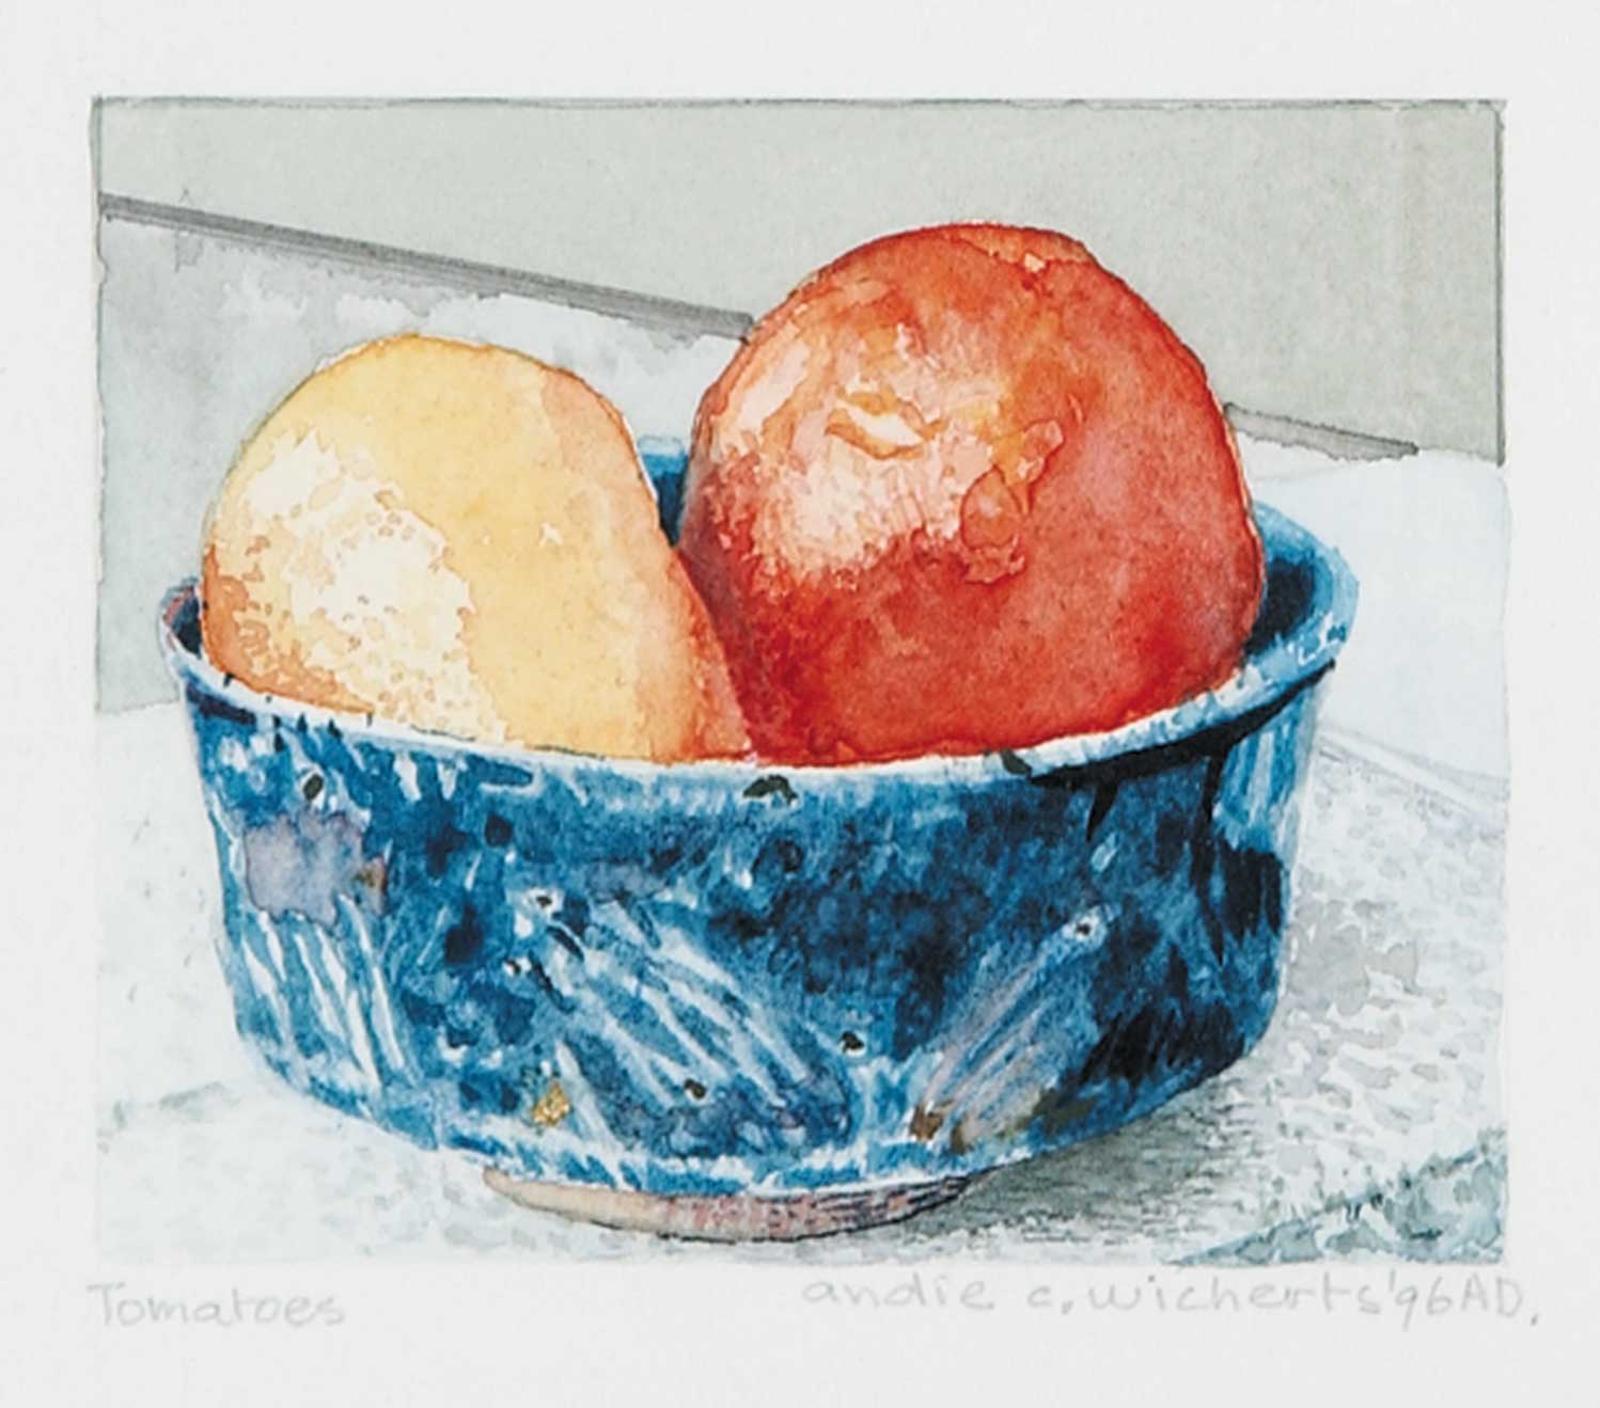 Andie C. Wicherts (1930-2019) - Tomatoes